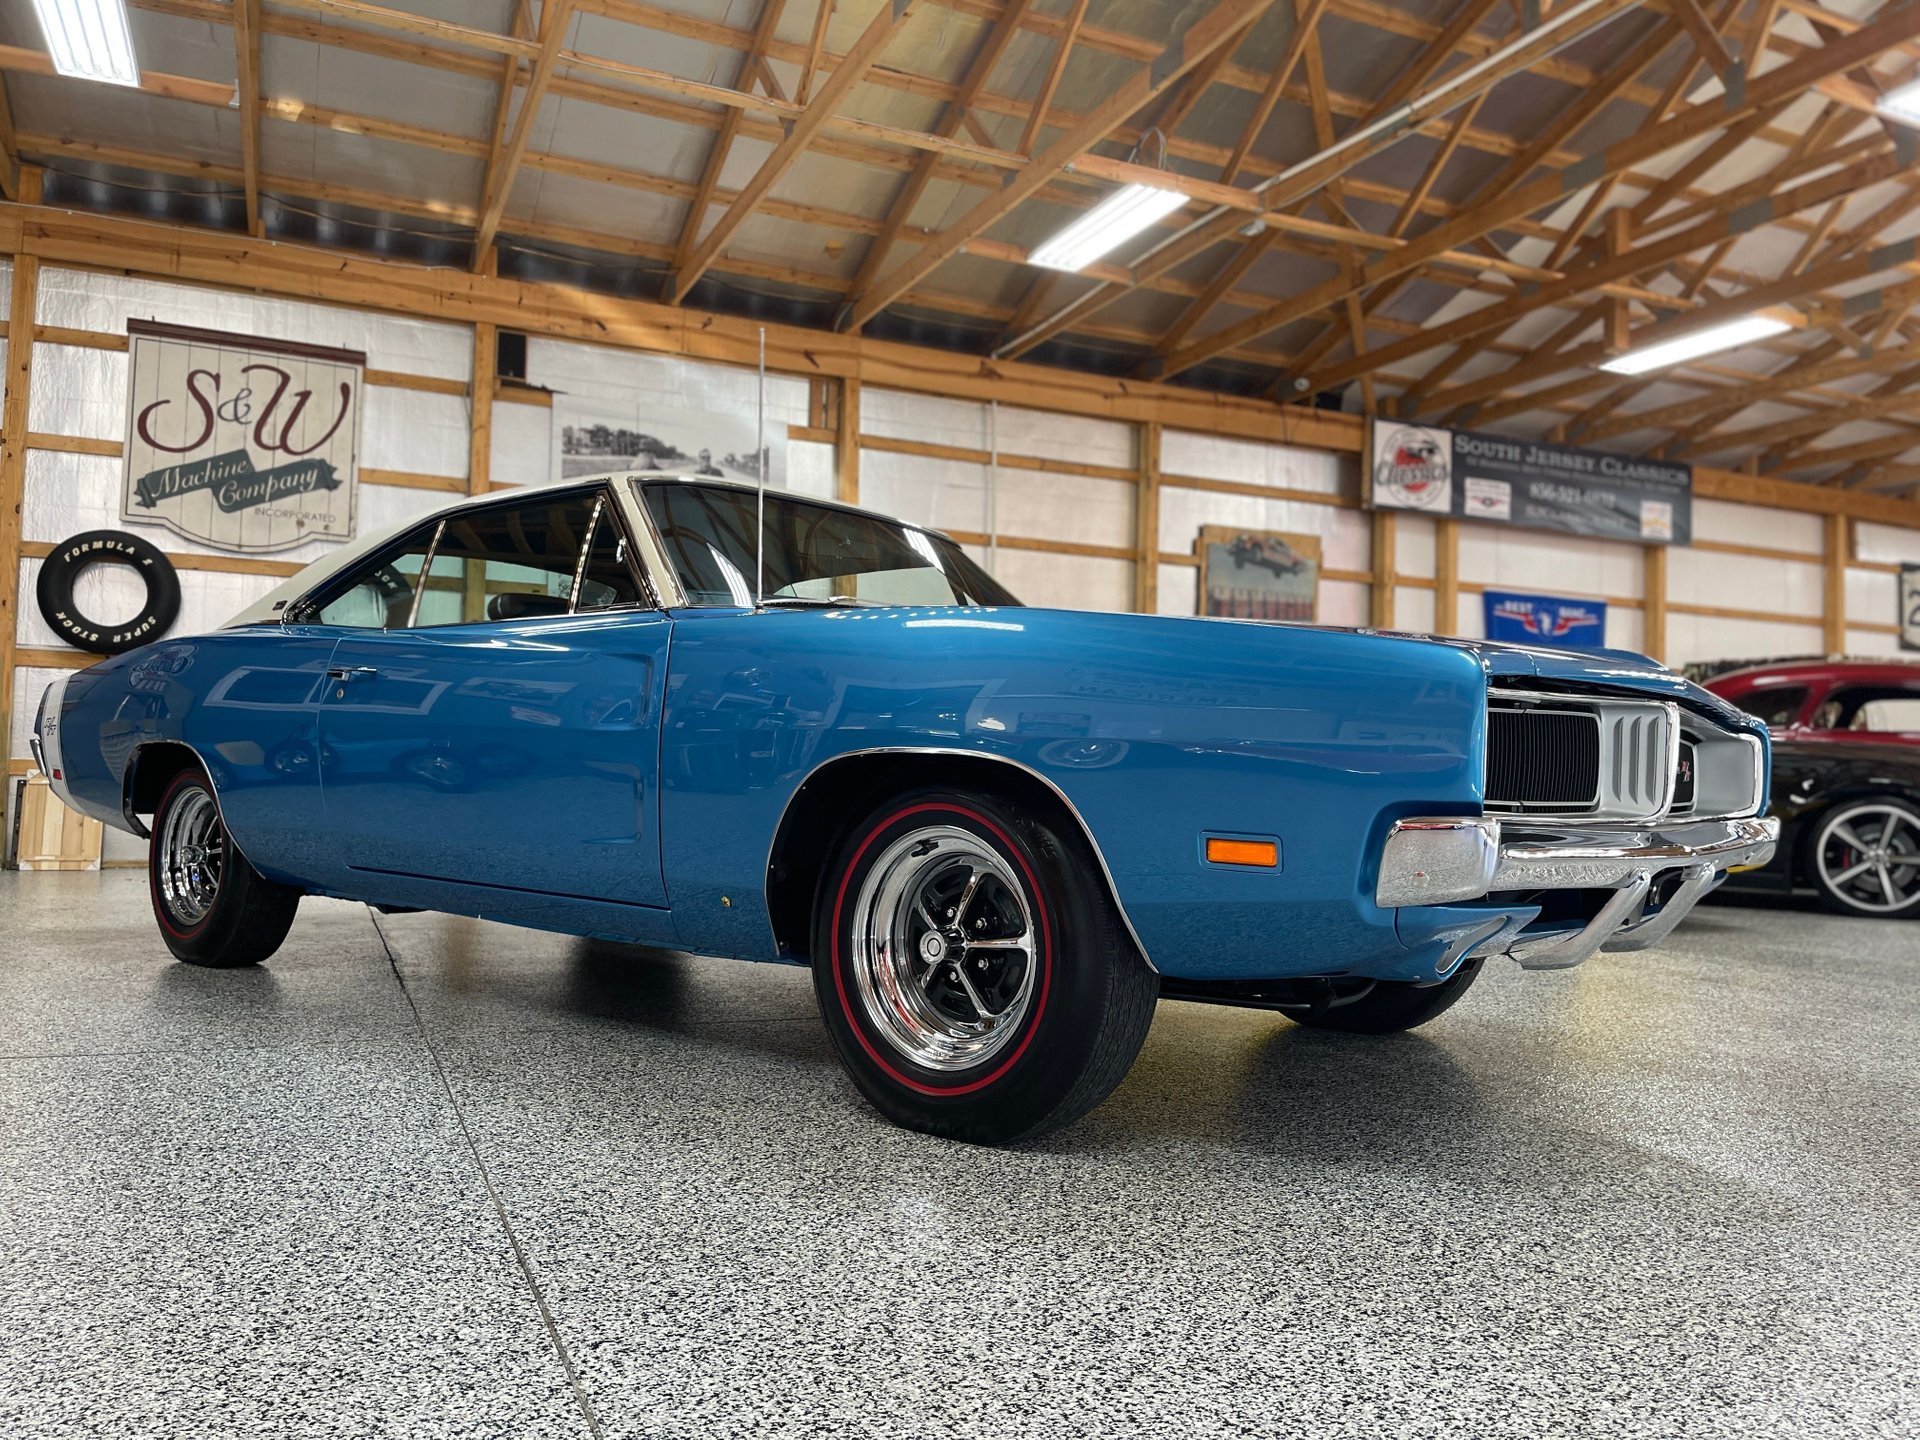 1969 Dodge Charger | South Jersey Classics